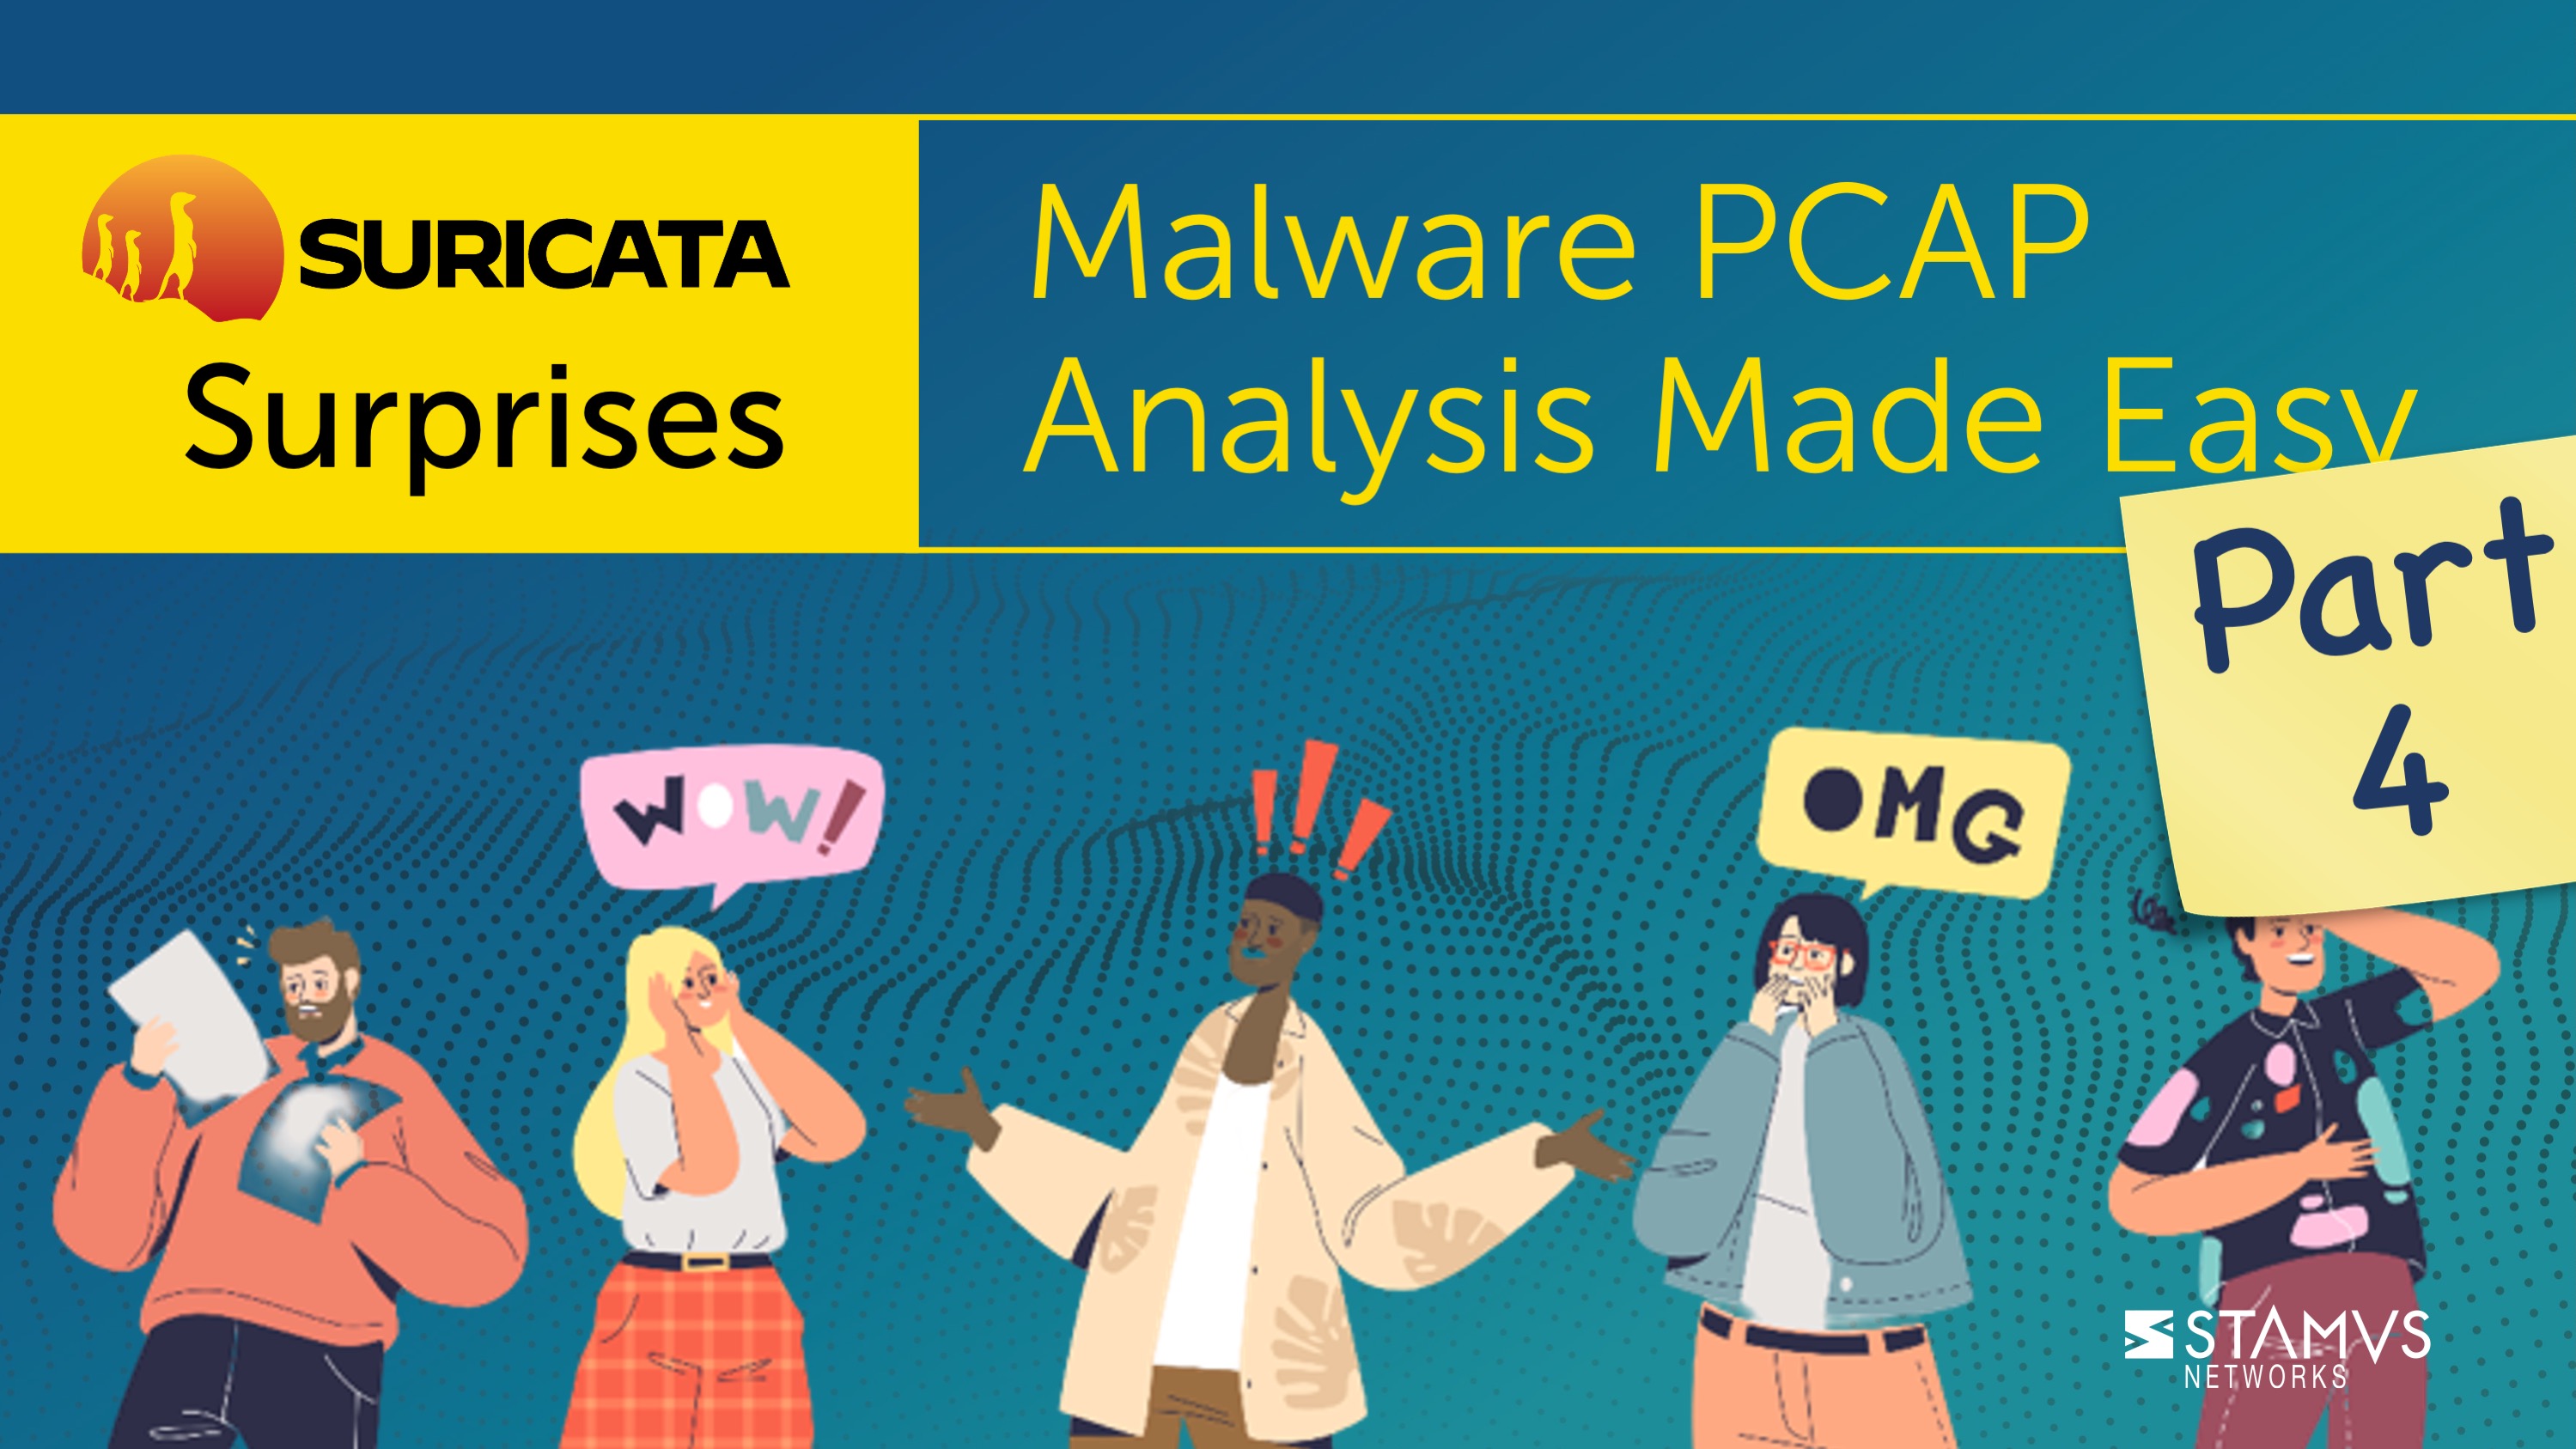 Malware PCAP Analysis Made Easy Pt. 4 by Peter Manev